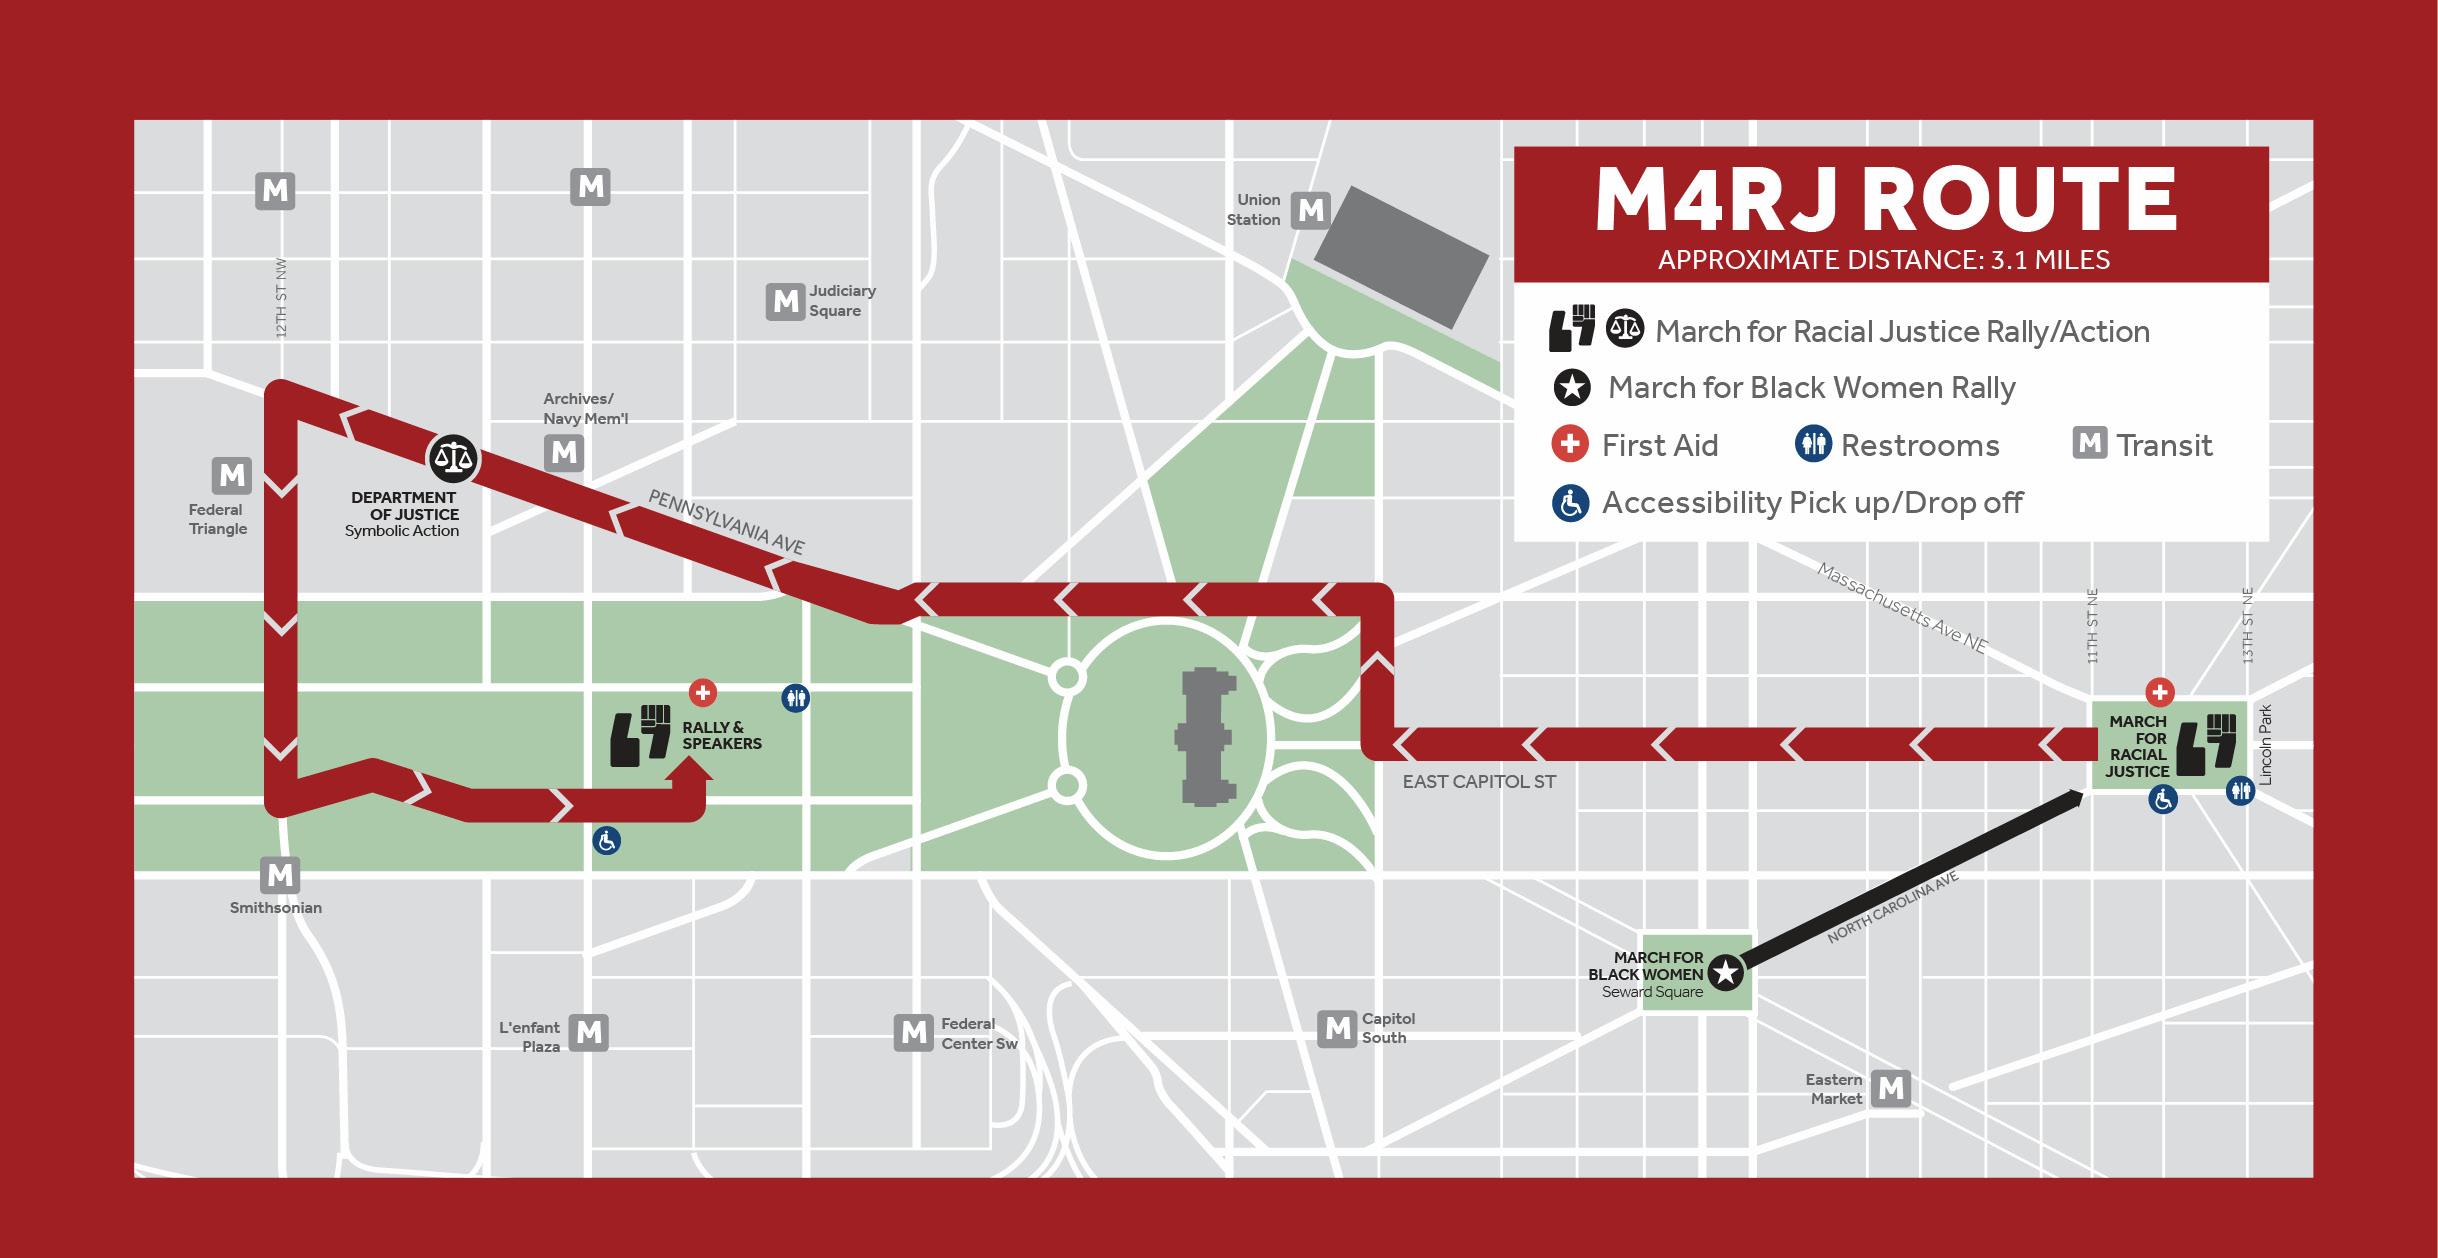 A graphic map of the march route from Lincoln Park to the Mall